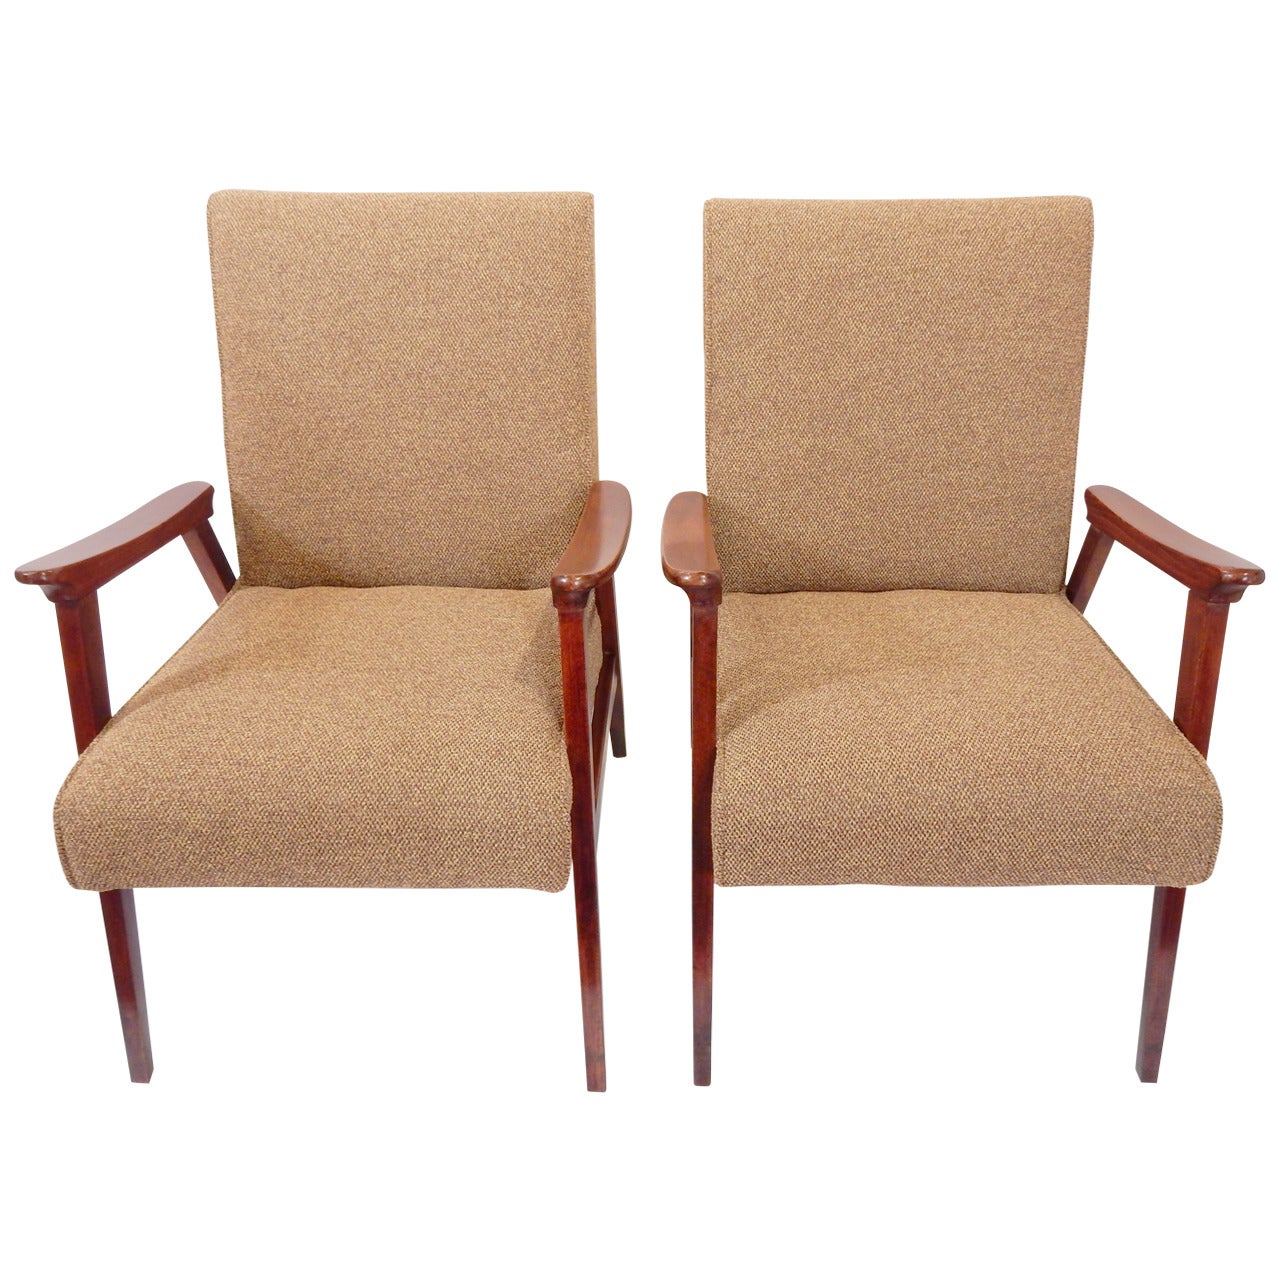 Pair of Vintage Armchairs, French, 1950s For Sale